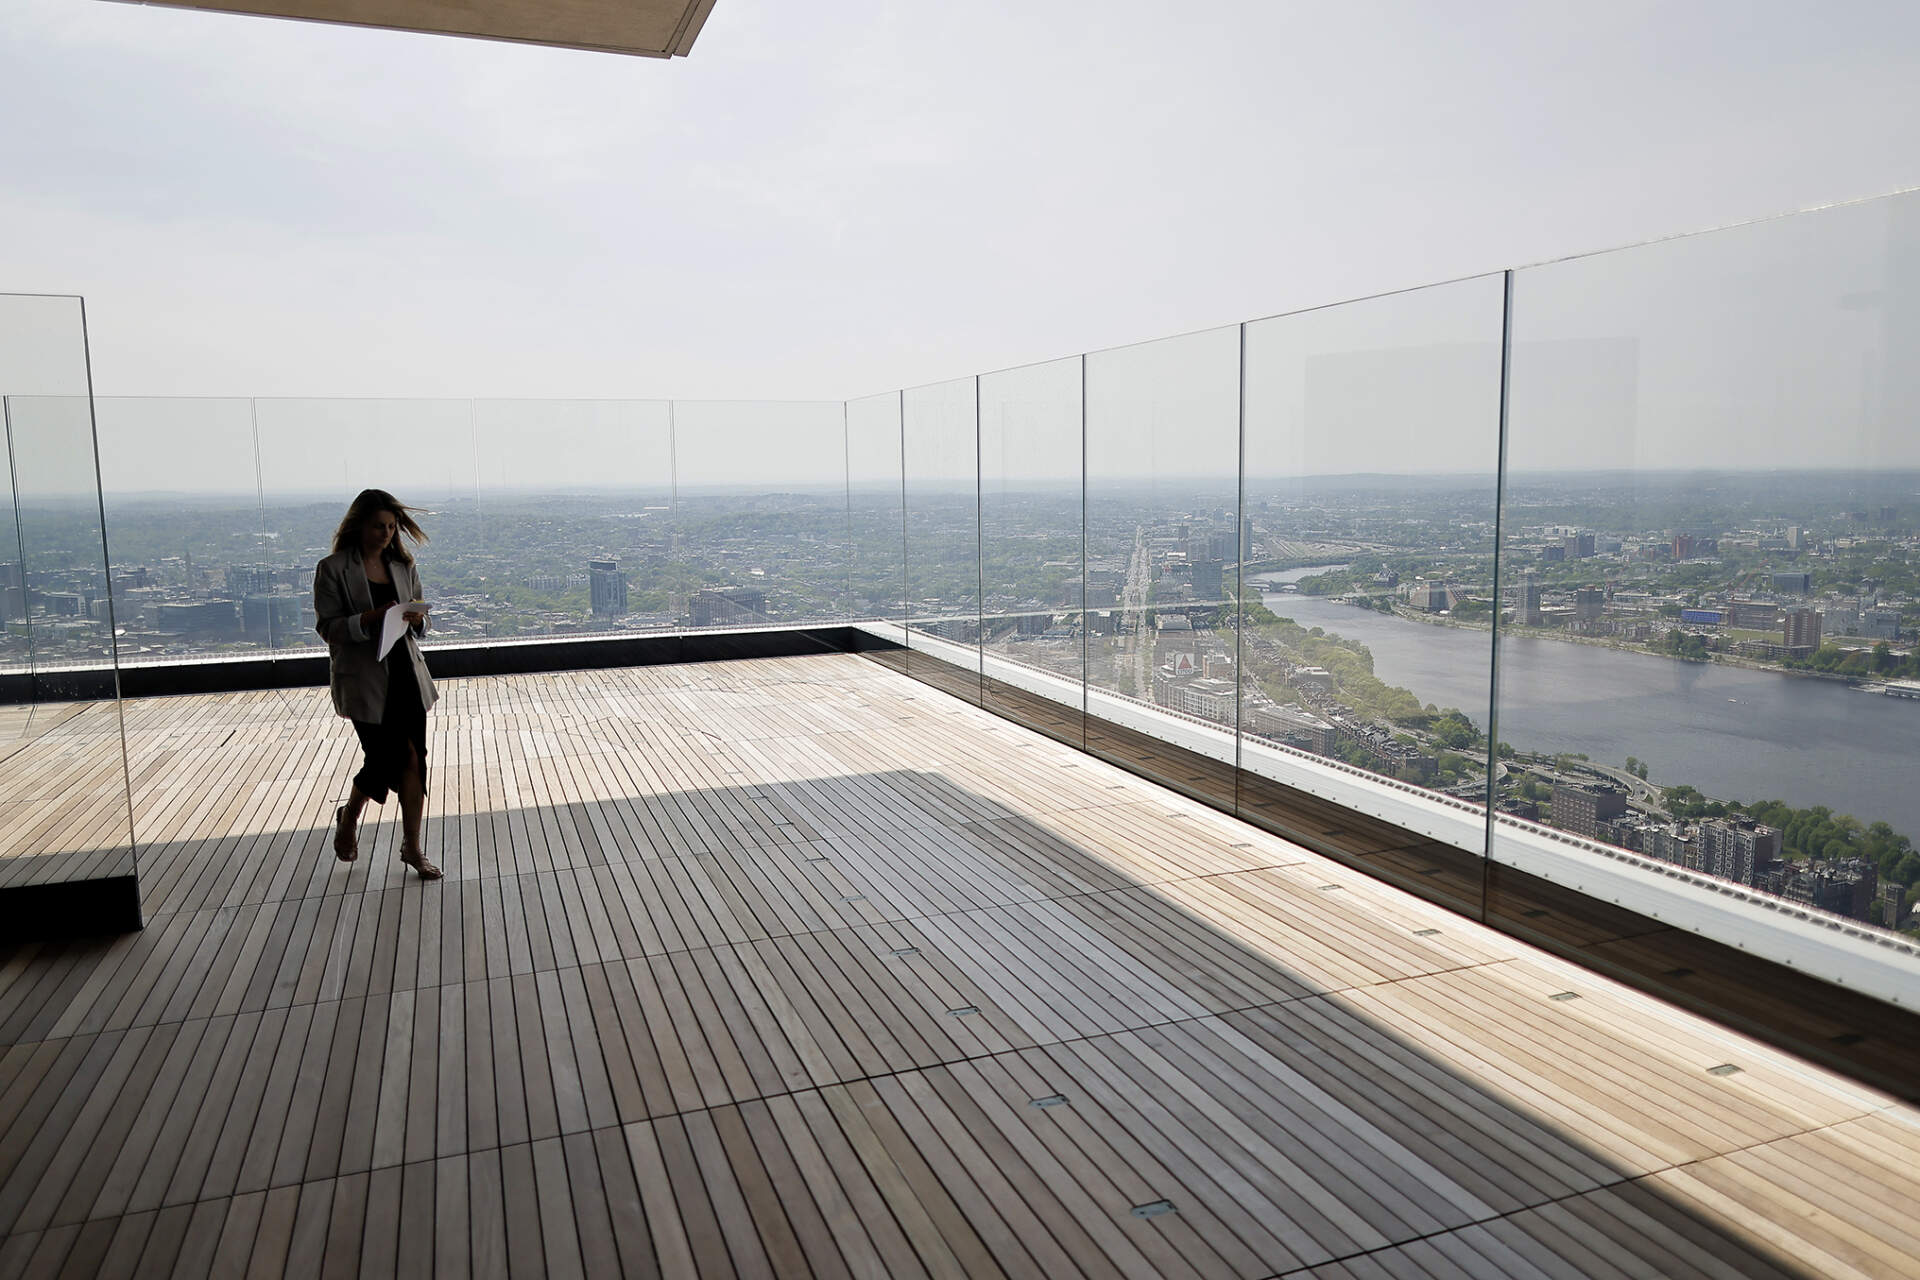 Rebecca Stoddard, the vice president of marketing at BXP, walks out on the deck of "The Cloud Terrace", an outdoor wraparound deck on the 51st floor. (Photo by Lane Turner/The Boston Globe via Getty Images)